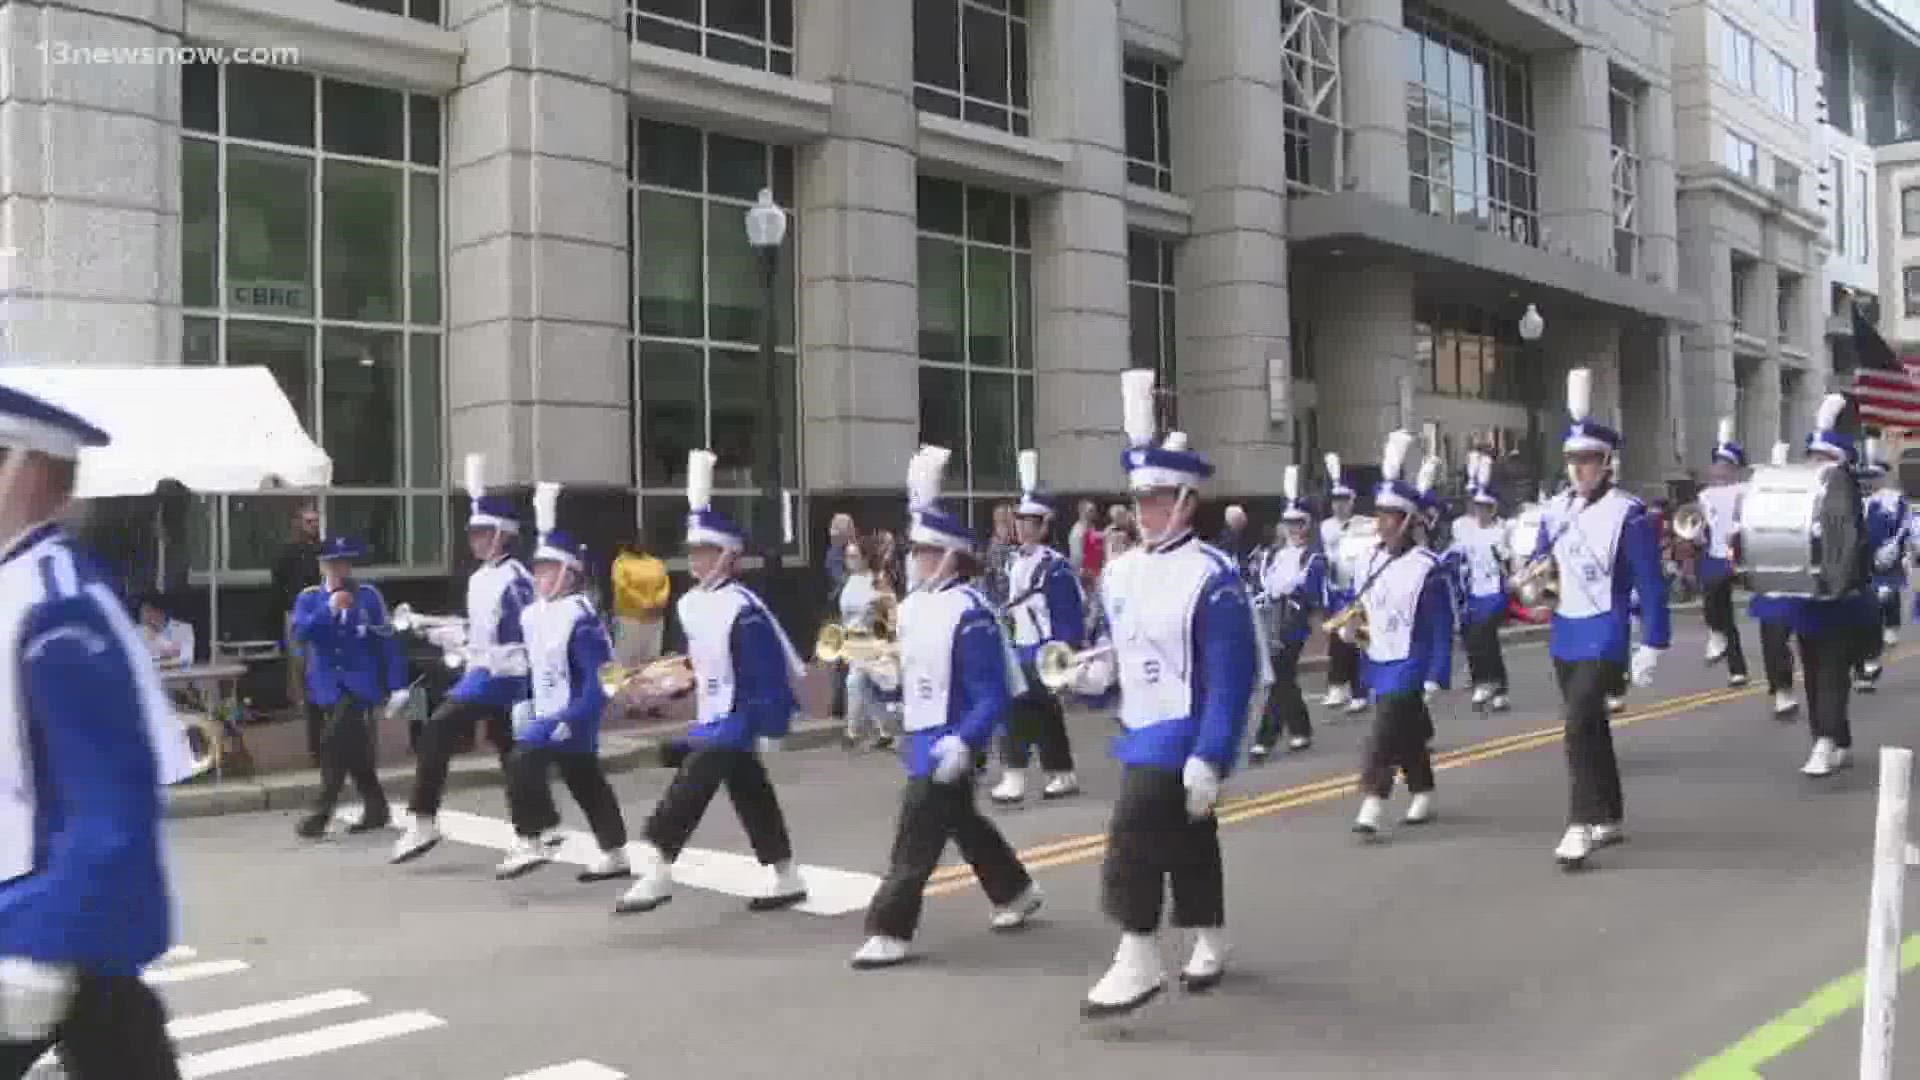 Parade floats and marching bands took over Granby Street.